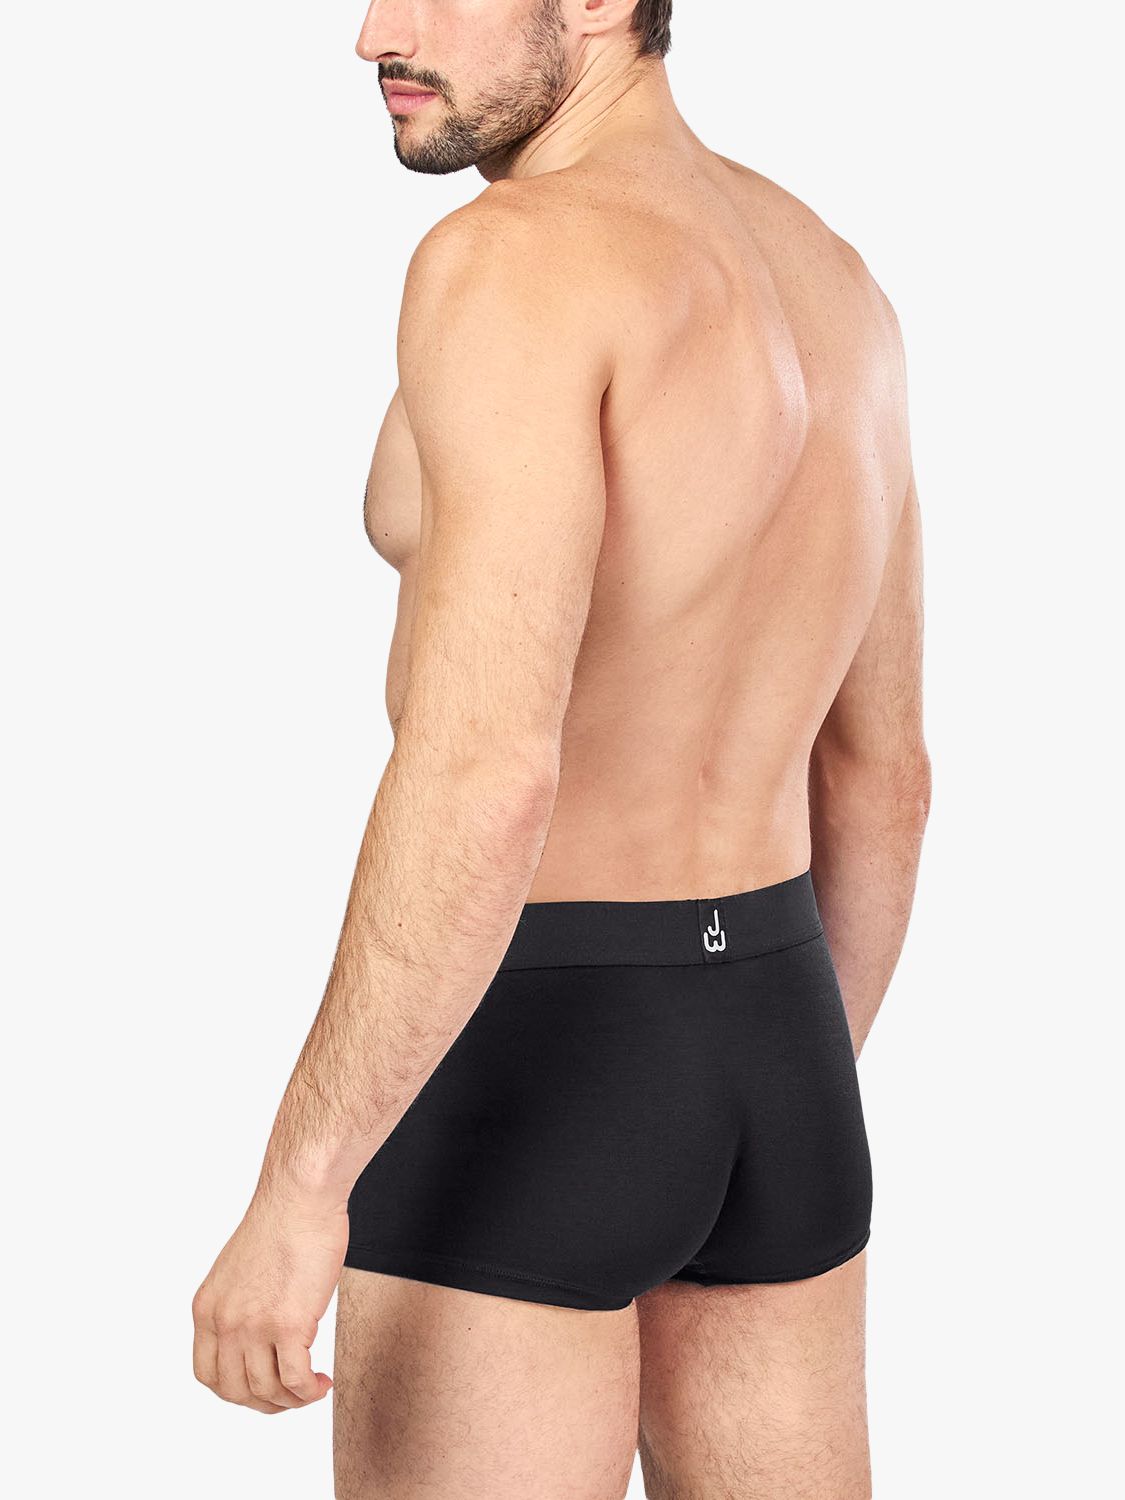 JustWears Active Trunks, Pack of 6, All Black at John Lewis & Partners